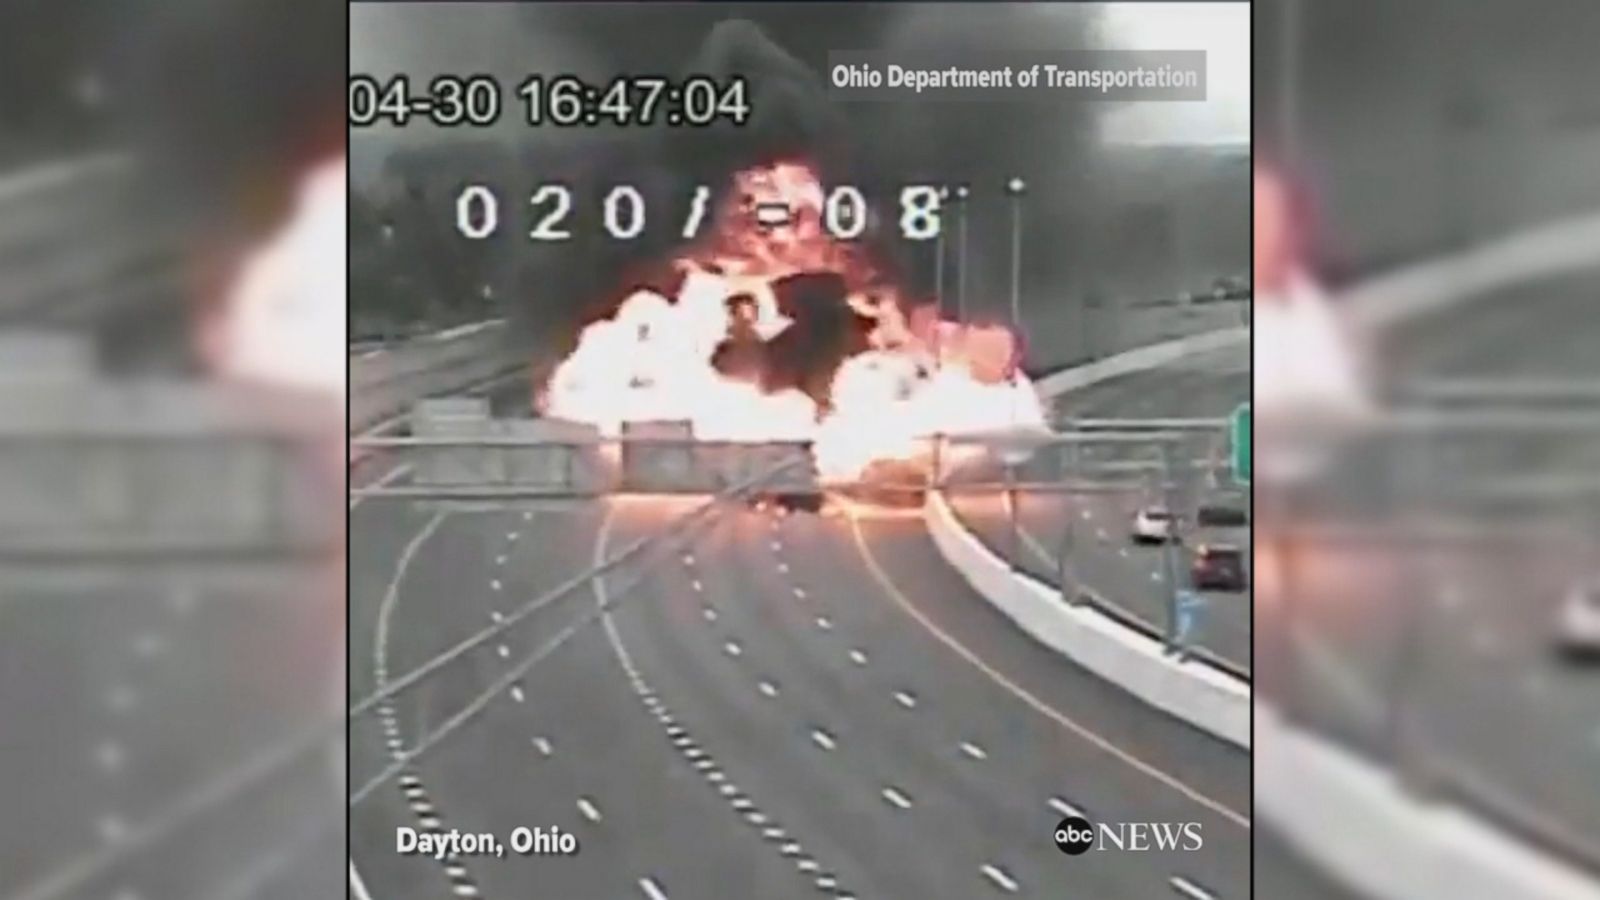 Car accident in Ohio causes explosion - Good Morning America